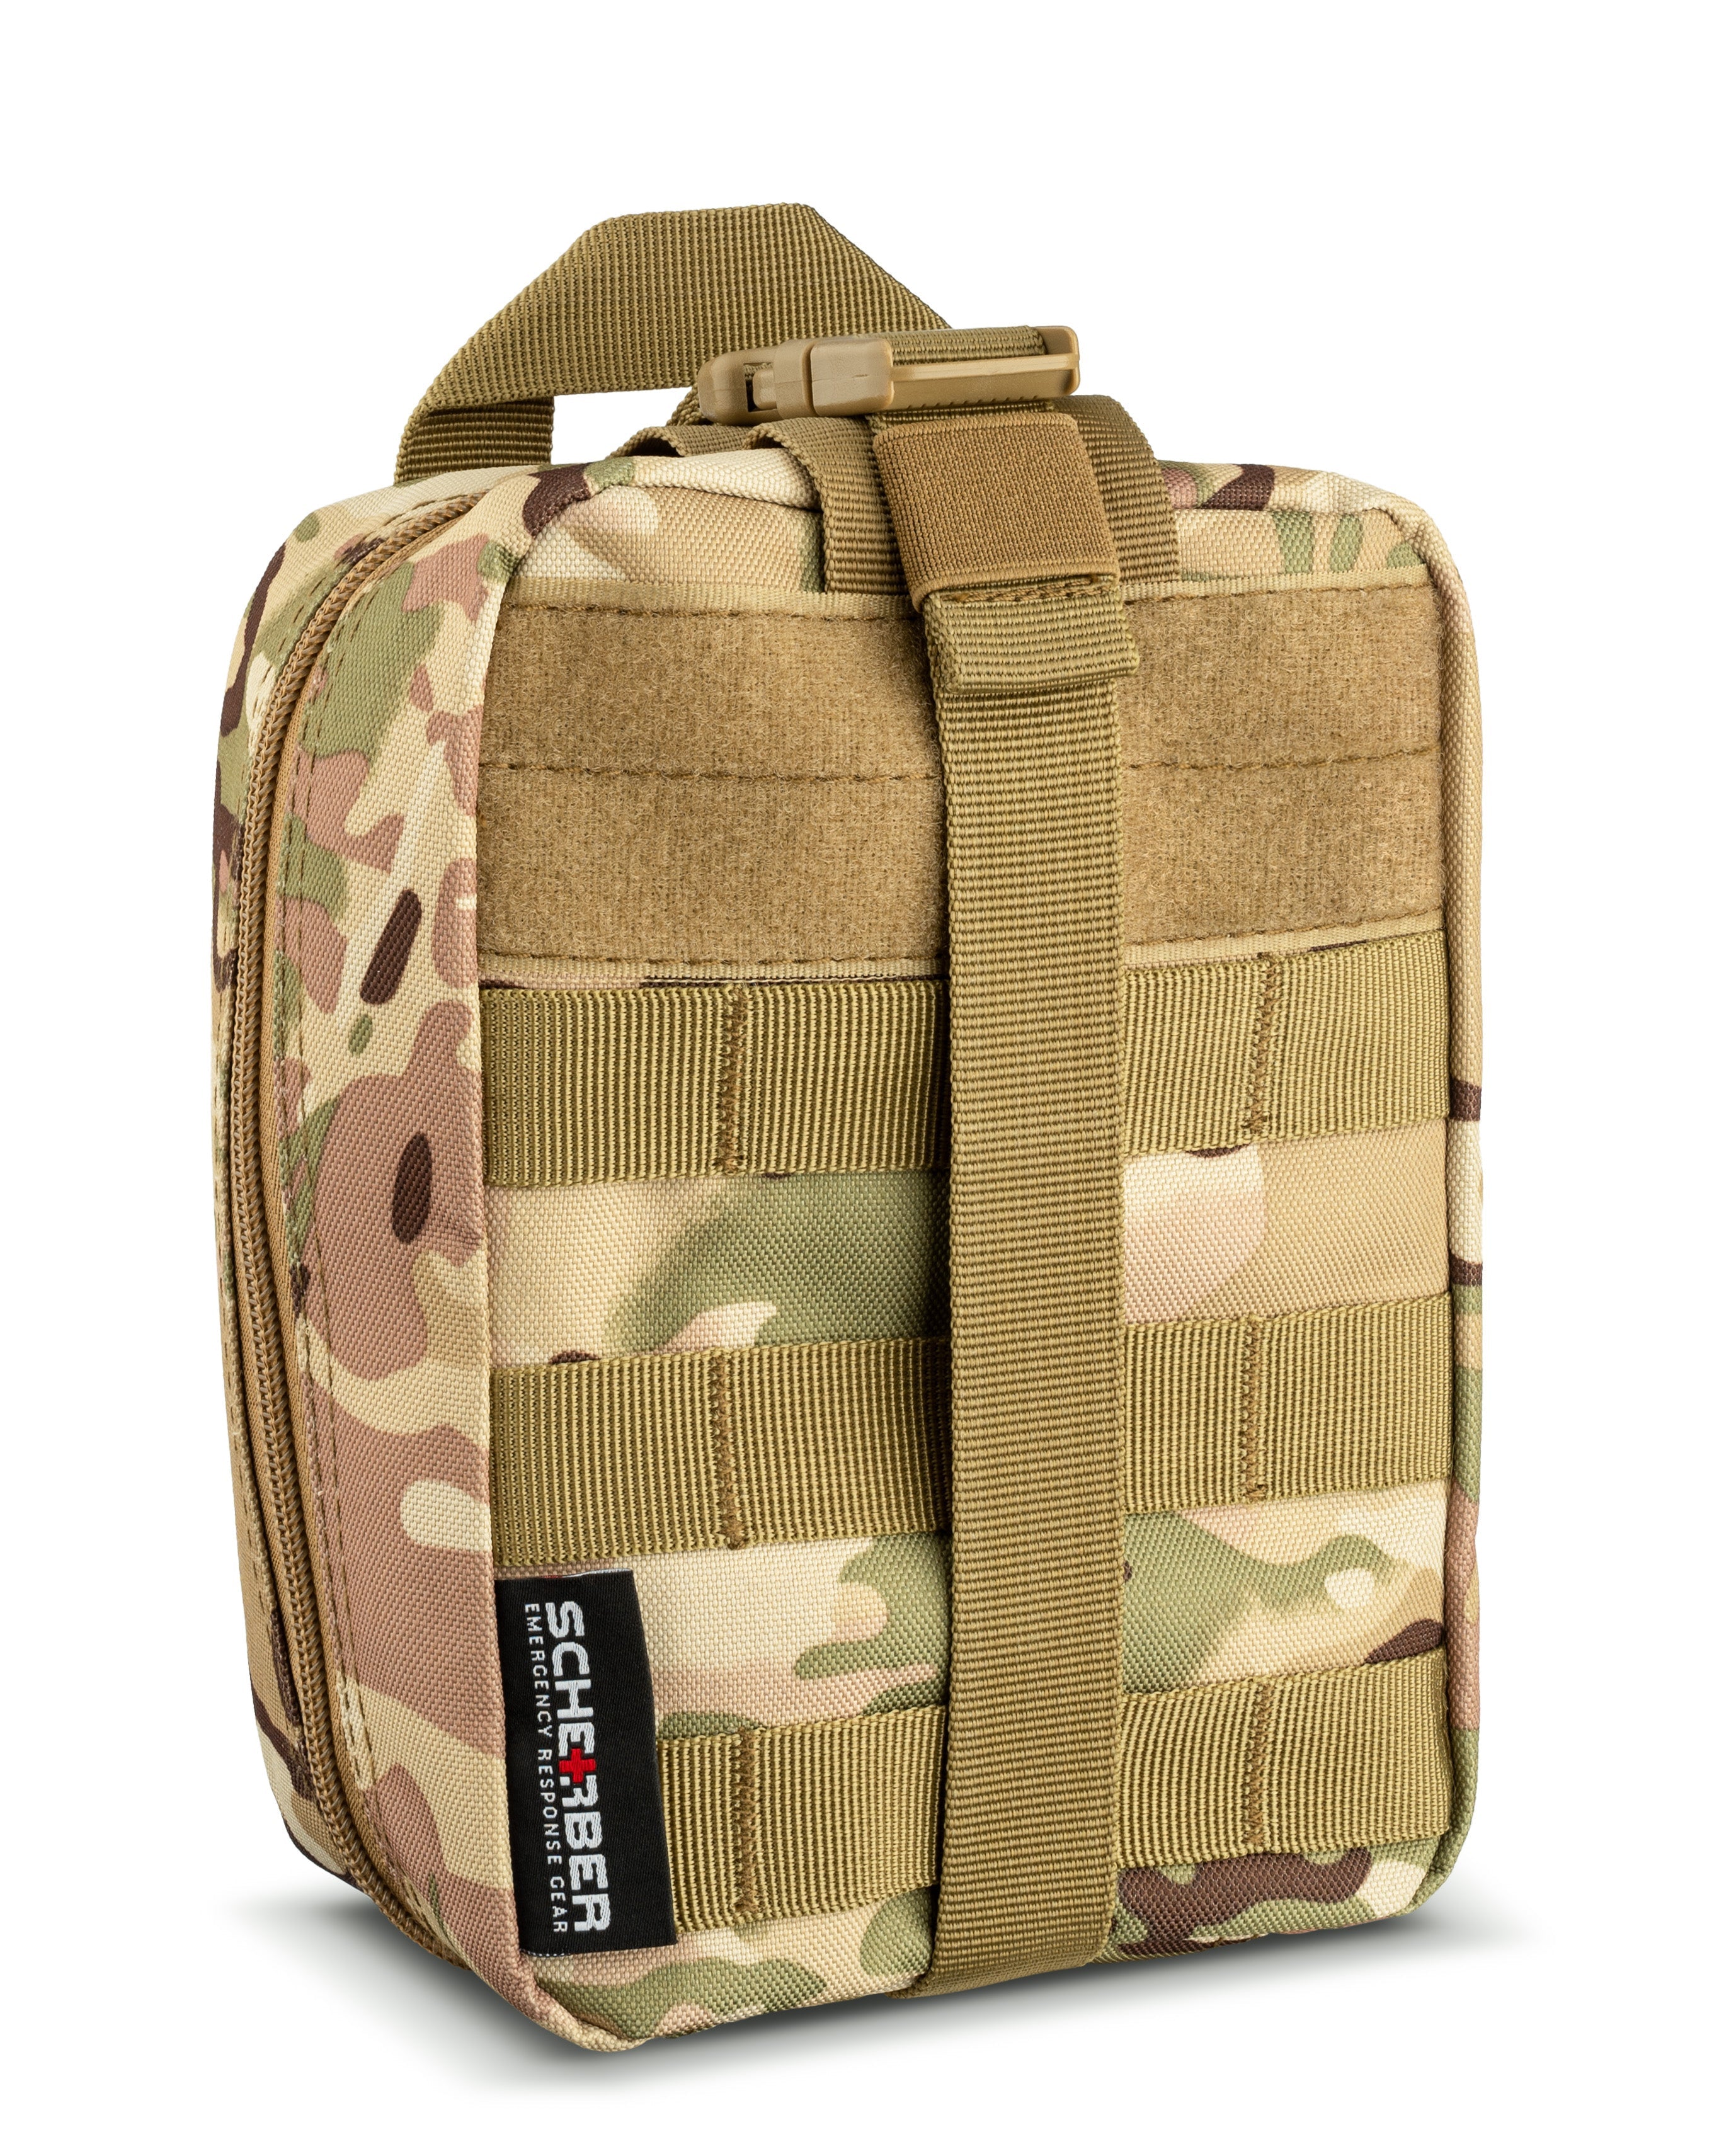 SINAIRSOFT Tactical Rolling Up Medical Pouch IFAK Emergency